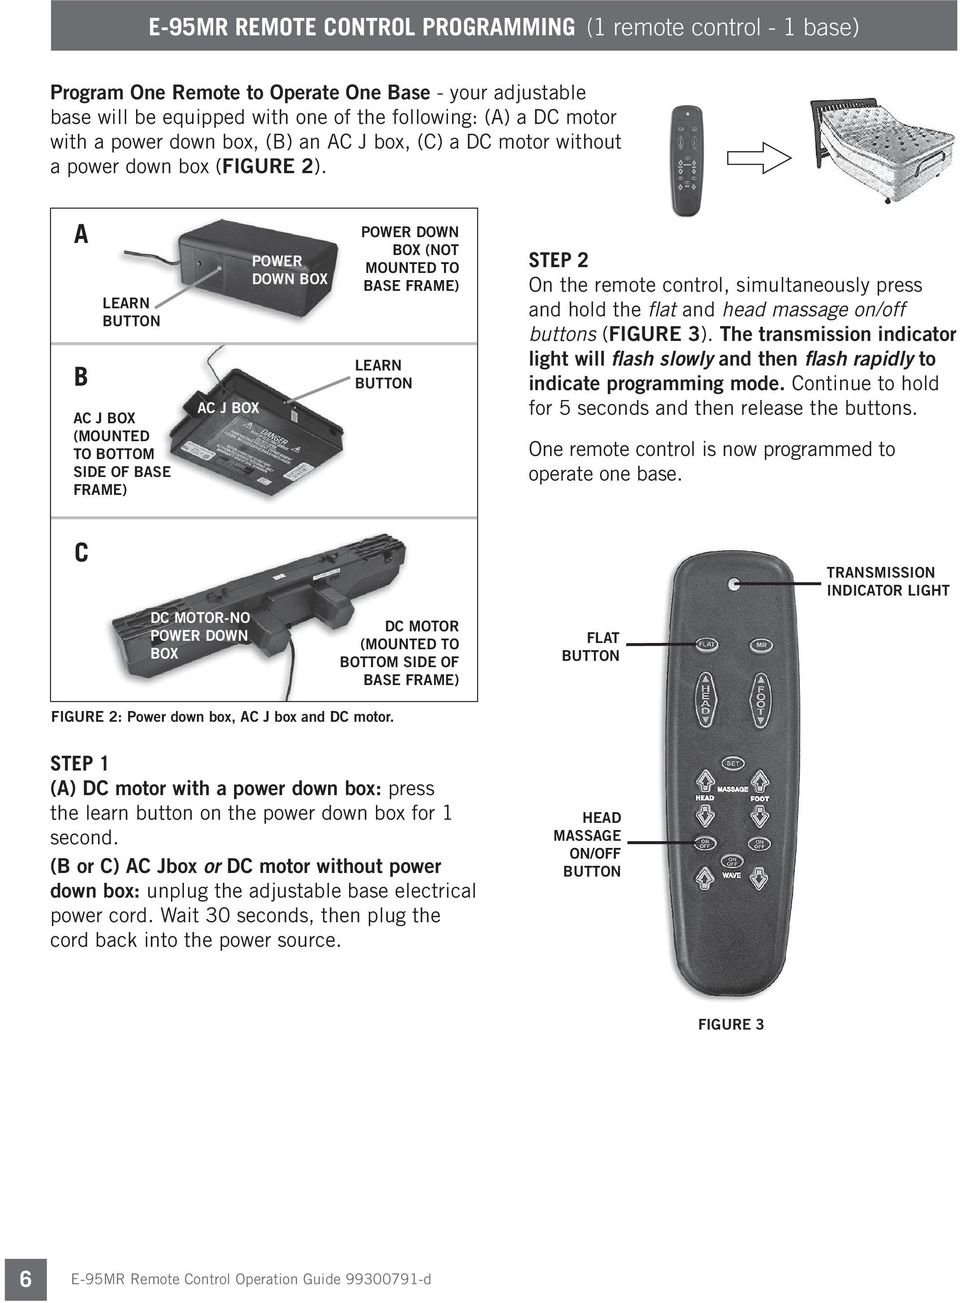 A B AC j box (mounted to bottom side of base frame) AC j box power down box Power down box (not mounted to base frame) Step 2 On the remote control, simultaneously press and hold the flat and head